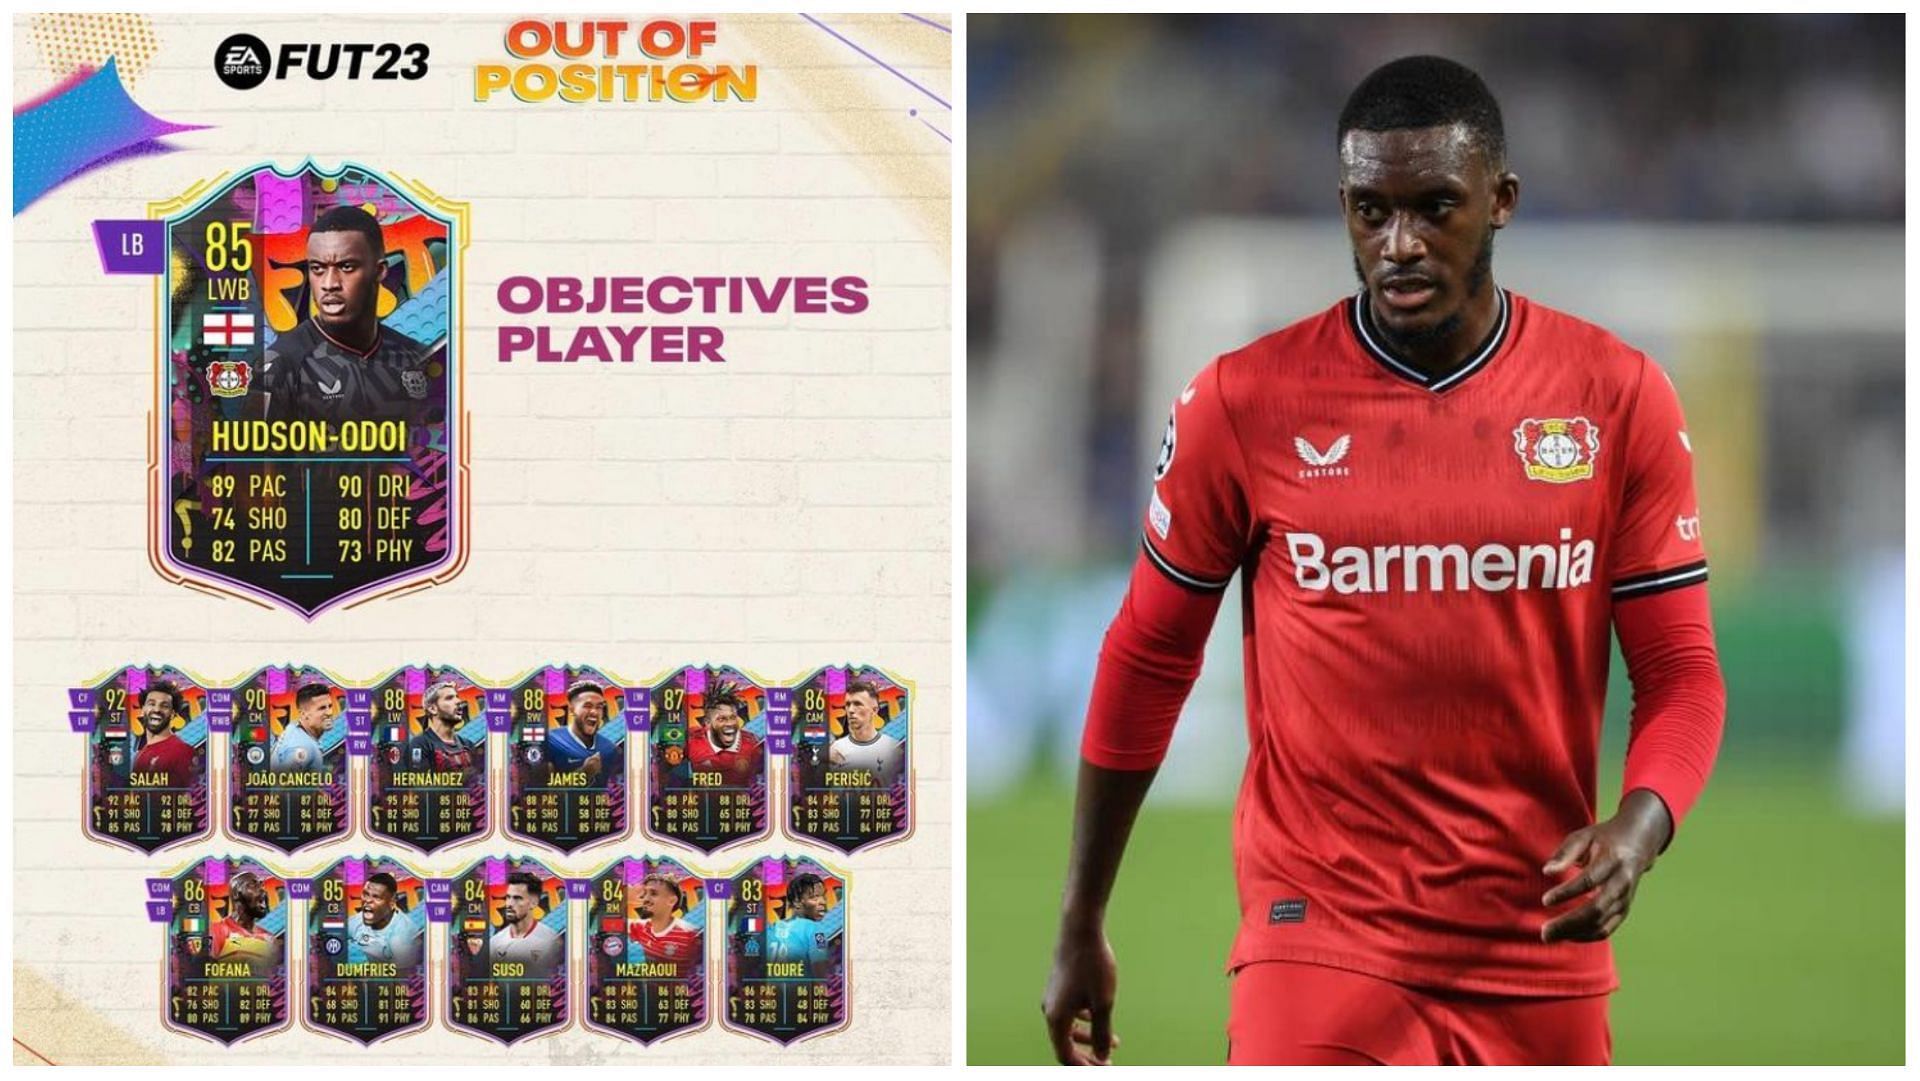 Hudson-Odoi has received an objective card in FIFA 23 (Images via EA Sports and Getty Images)